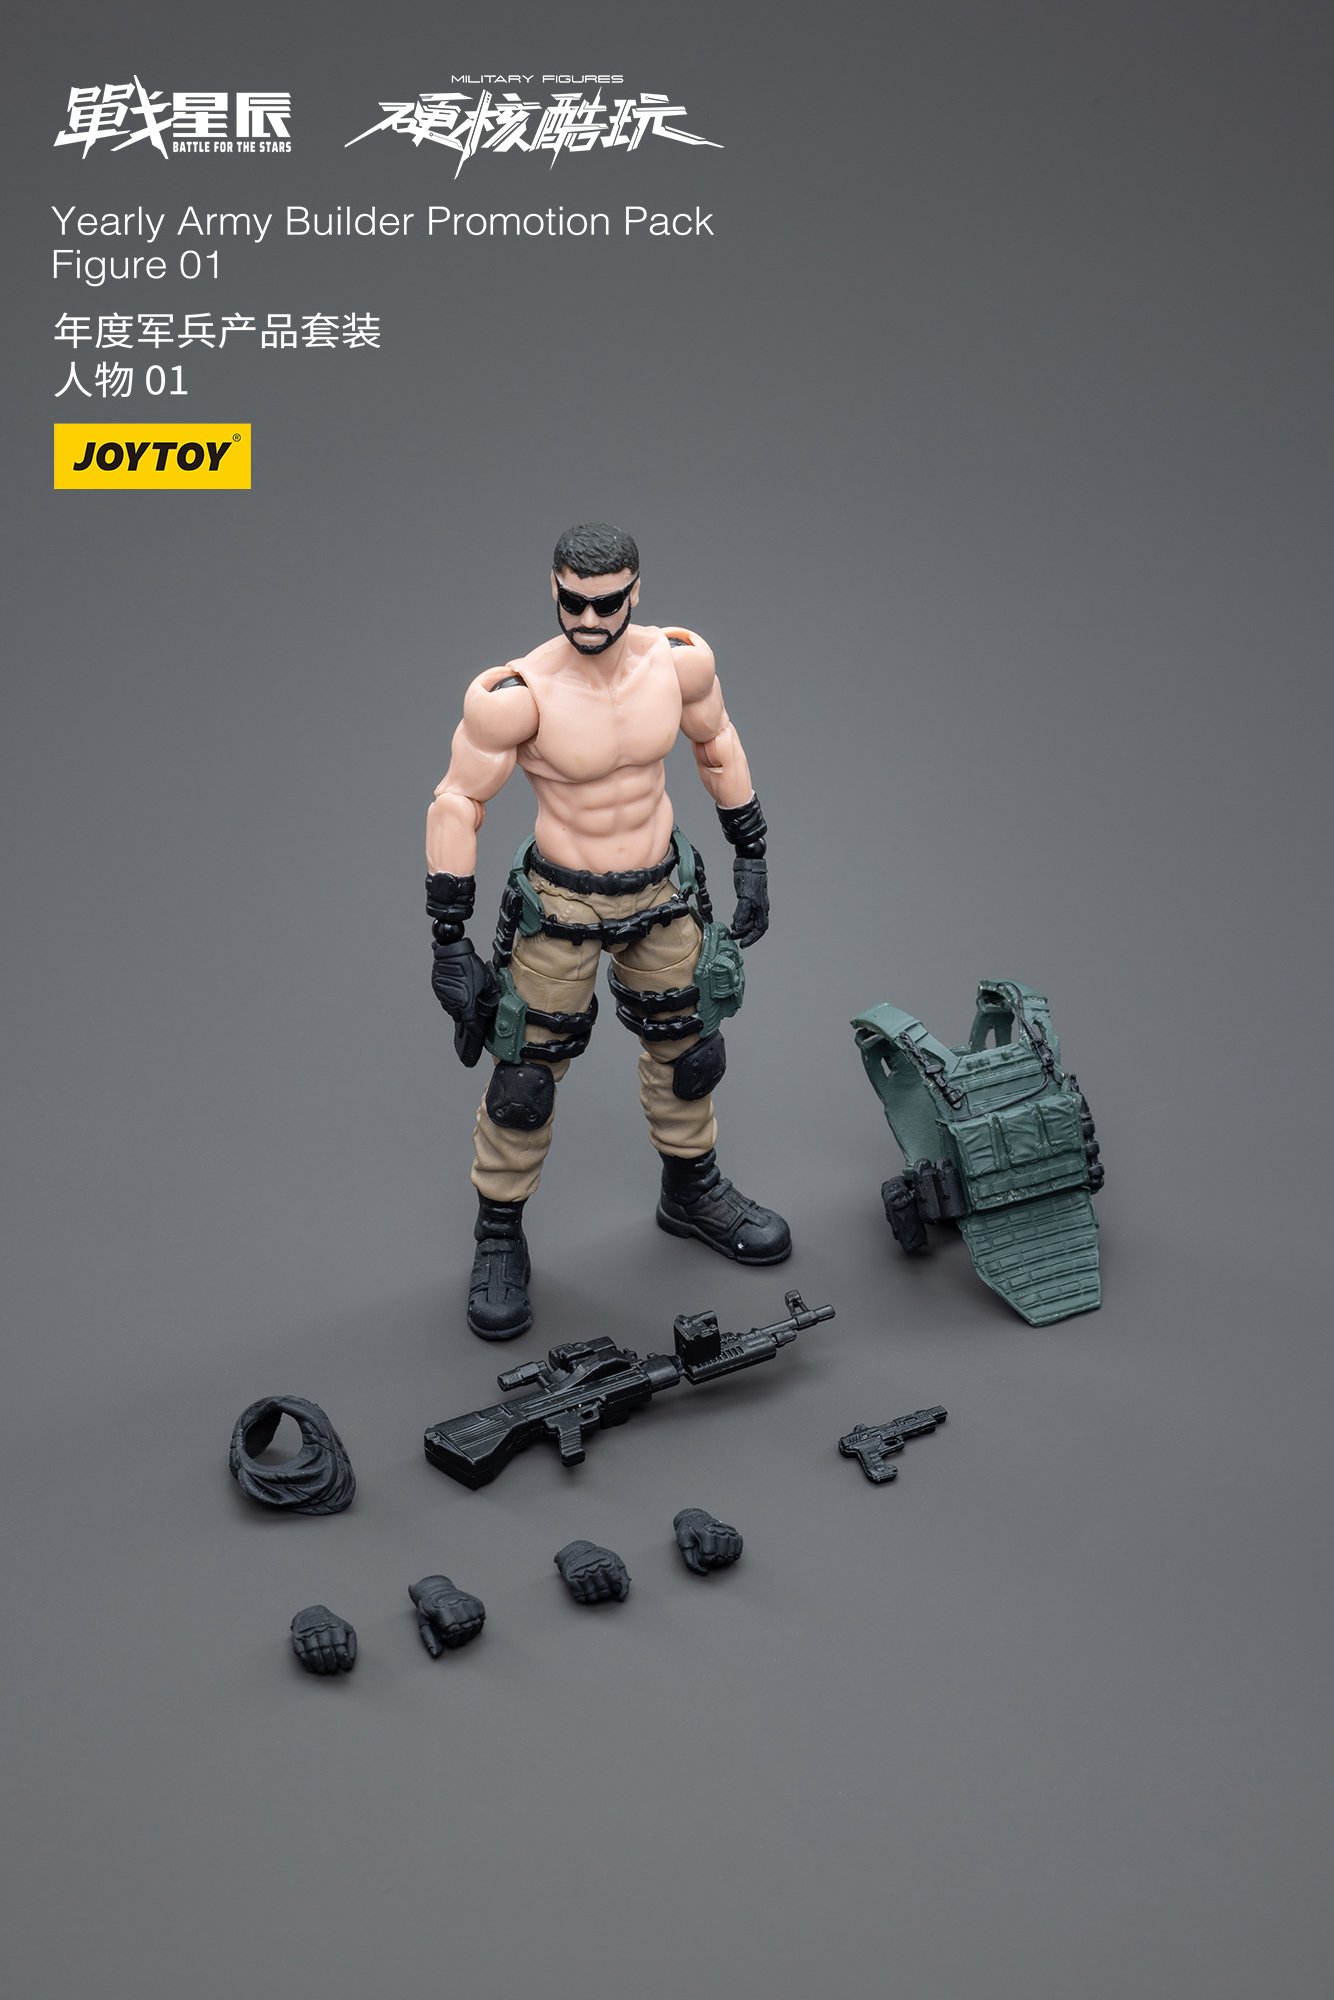 JoyToy Action Figure Battles for the Stars Military Figures Yearly Army Builder Promotion Pack